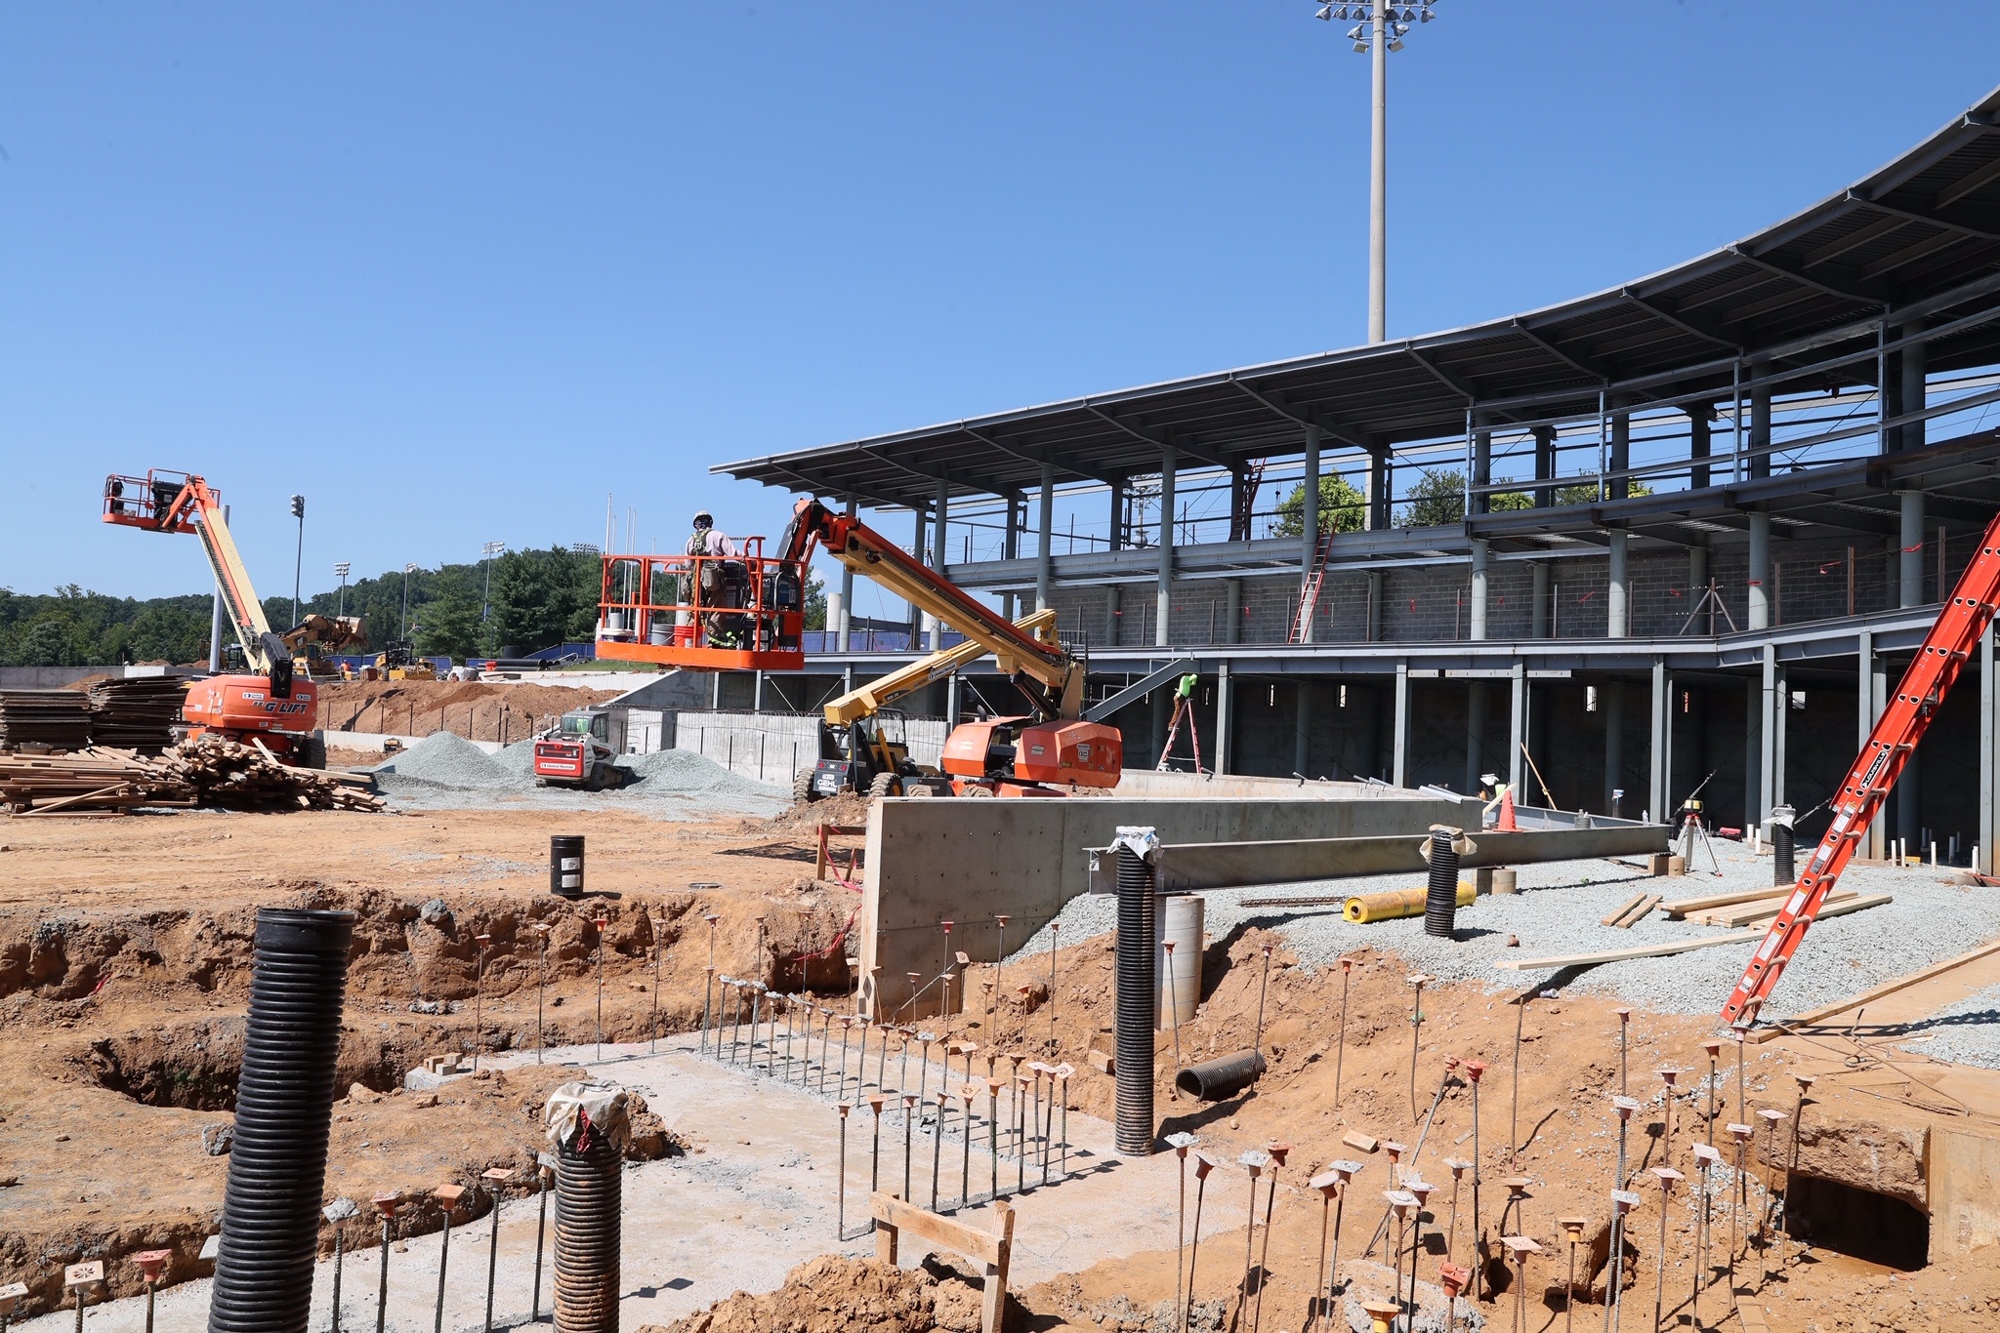 Palmer and her mother made the lead gift for a new softball stadium at the University of Virginia, which is expected to be completed before the start of the 2020 season.